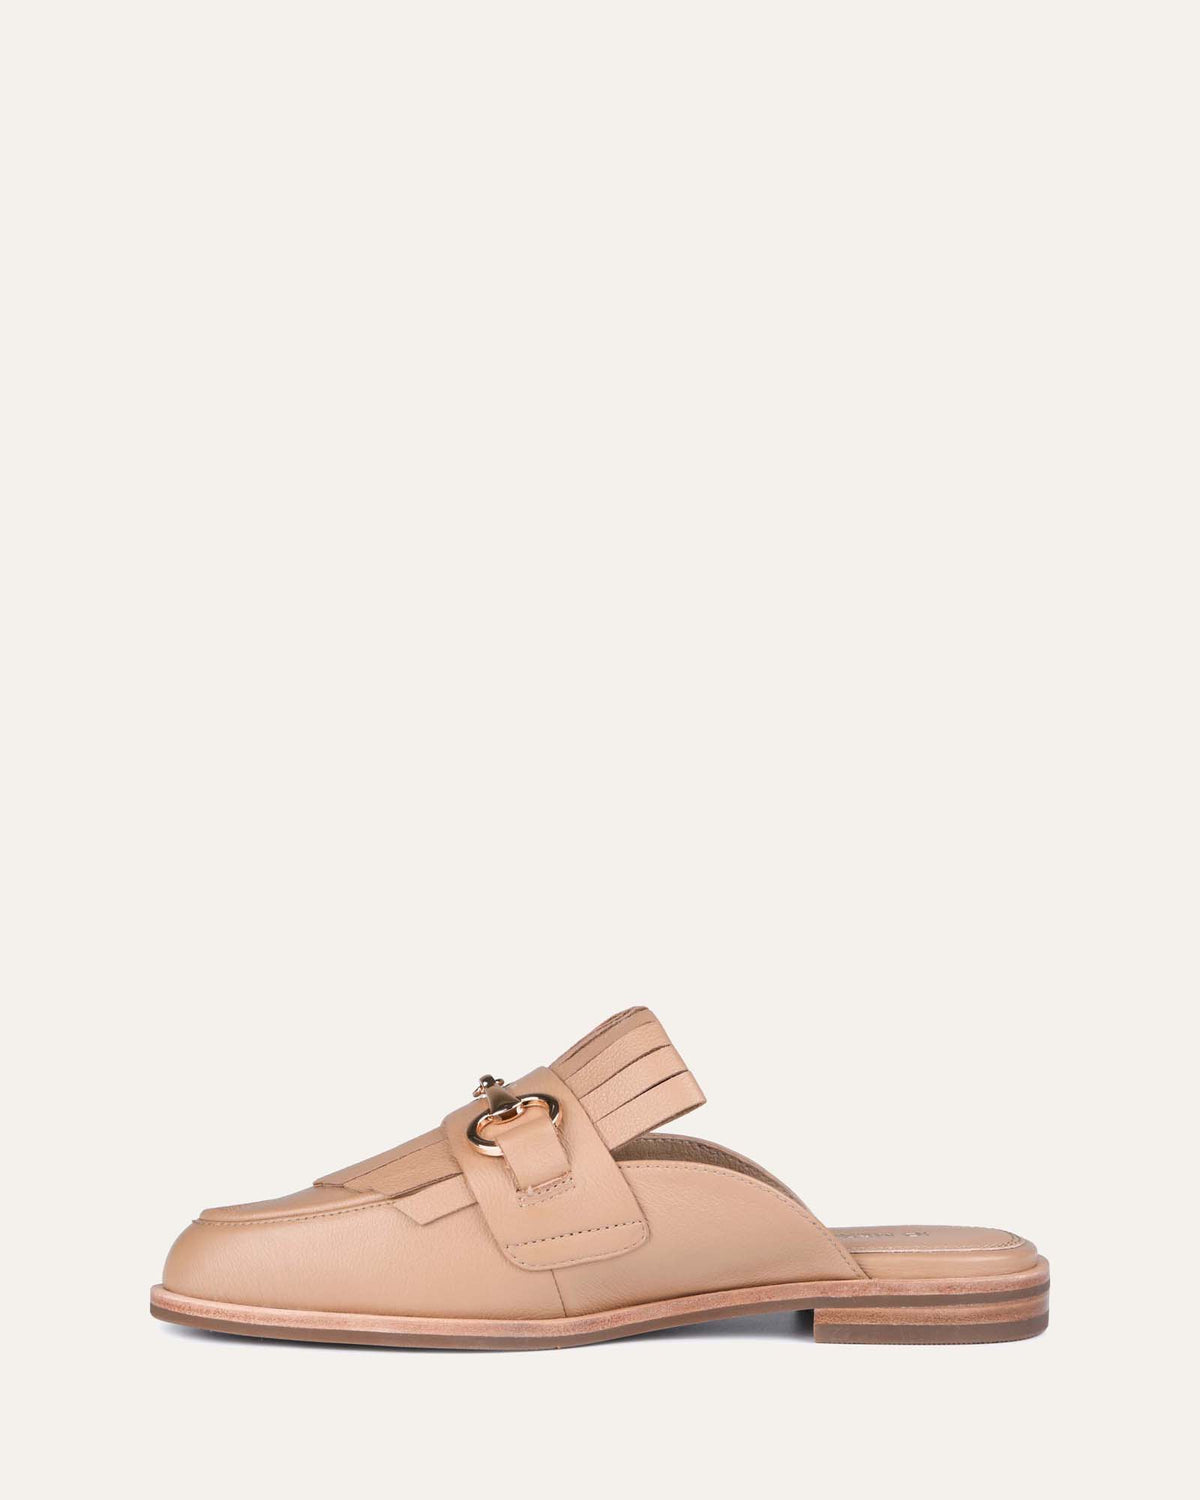 WESSEX LOAFERS TAN LEATHER